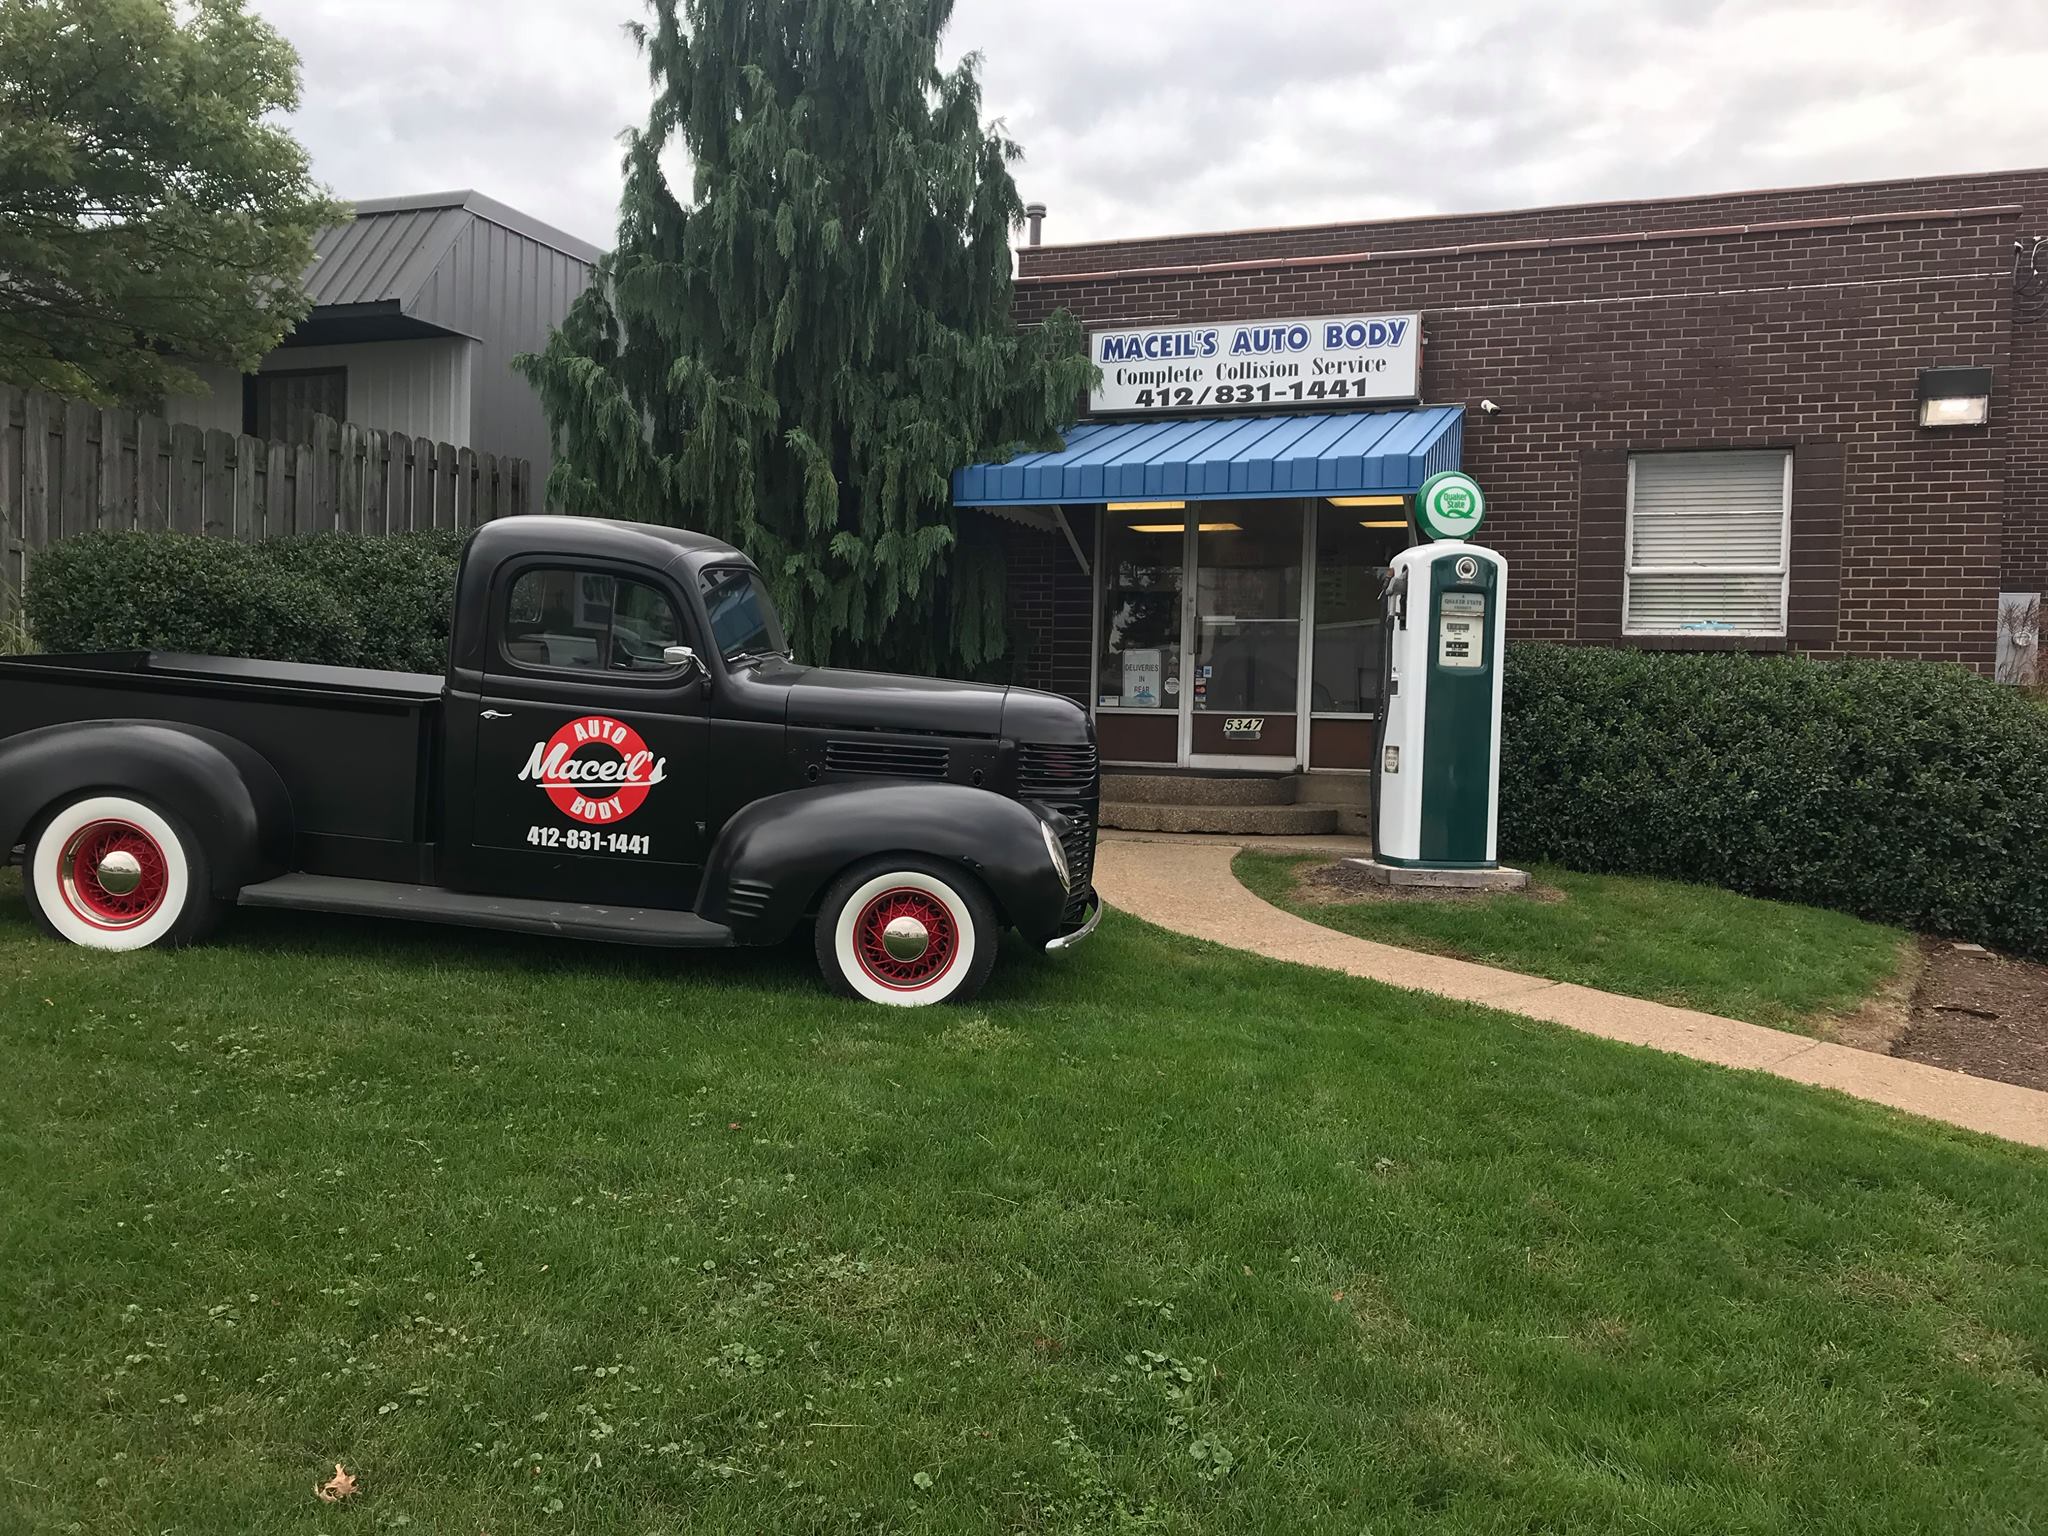 Black Antique Truck from Maceil's Auto Body